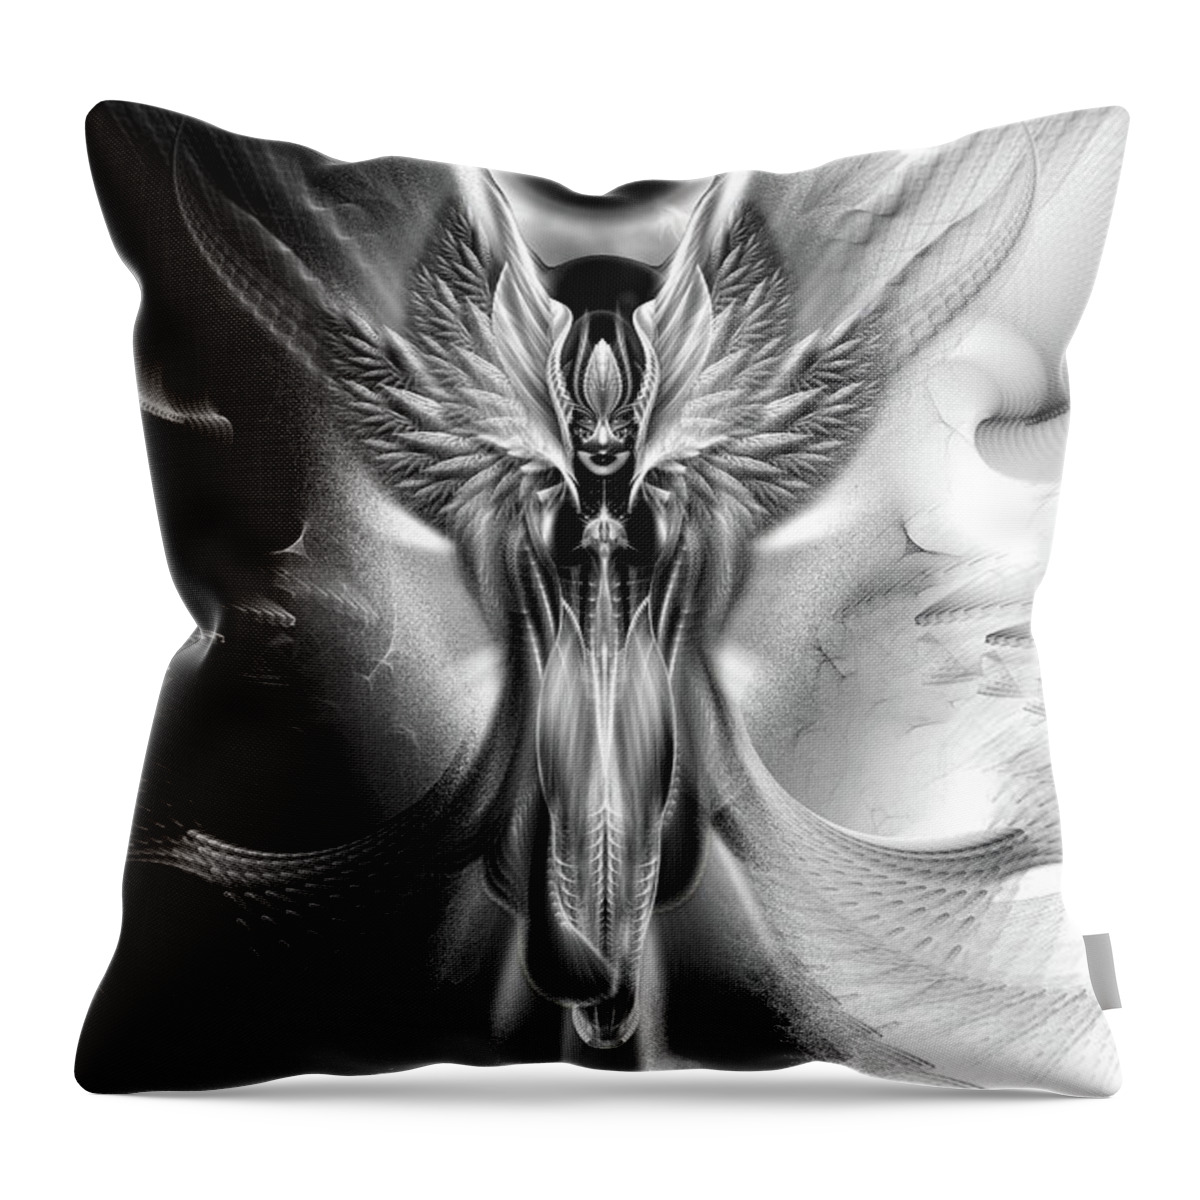 Arsencia Throw Pillow featuring the digital art Arsencia The Other Side Of Midnight Fractal Portrait by Rolando Burbon